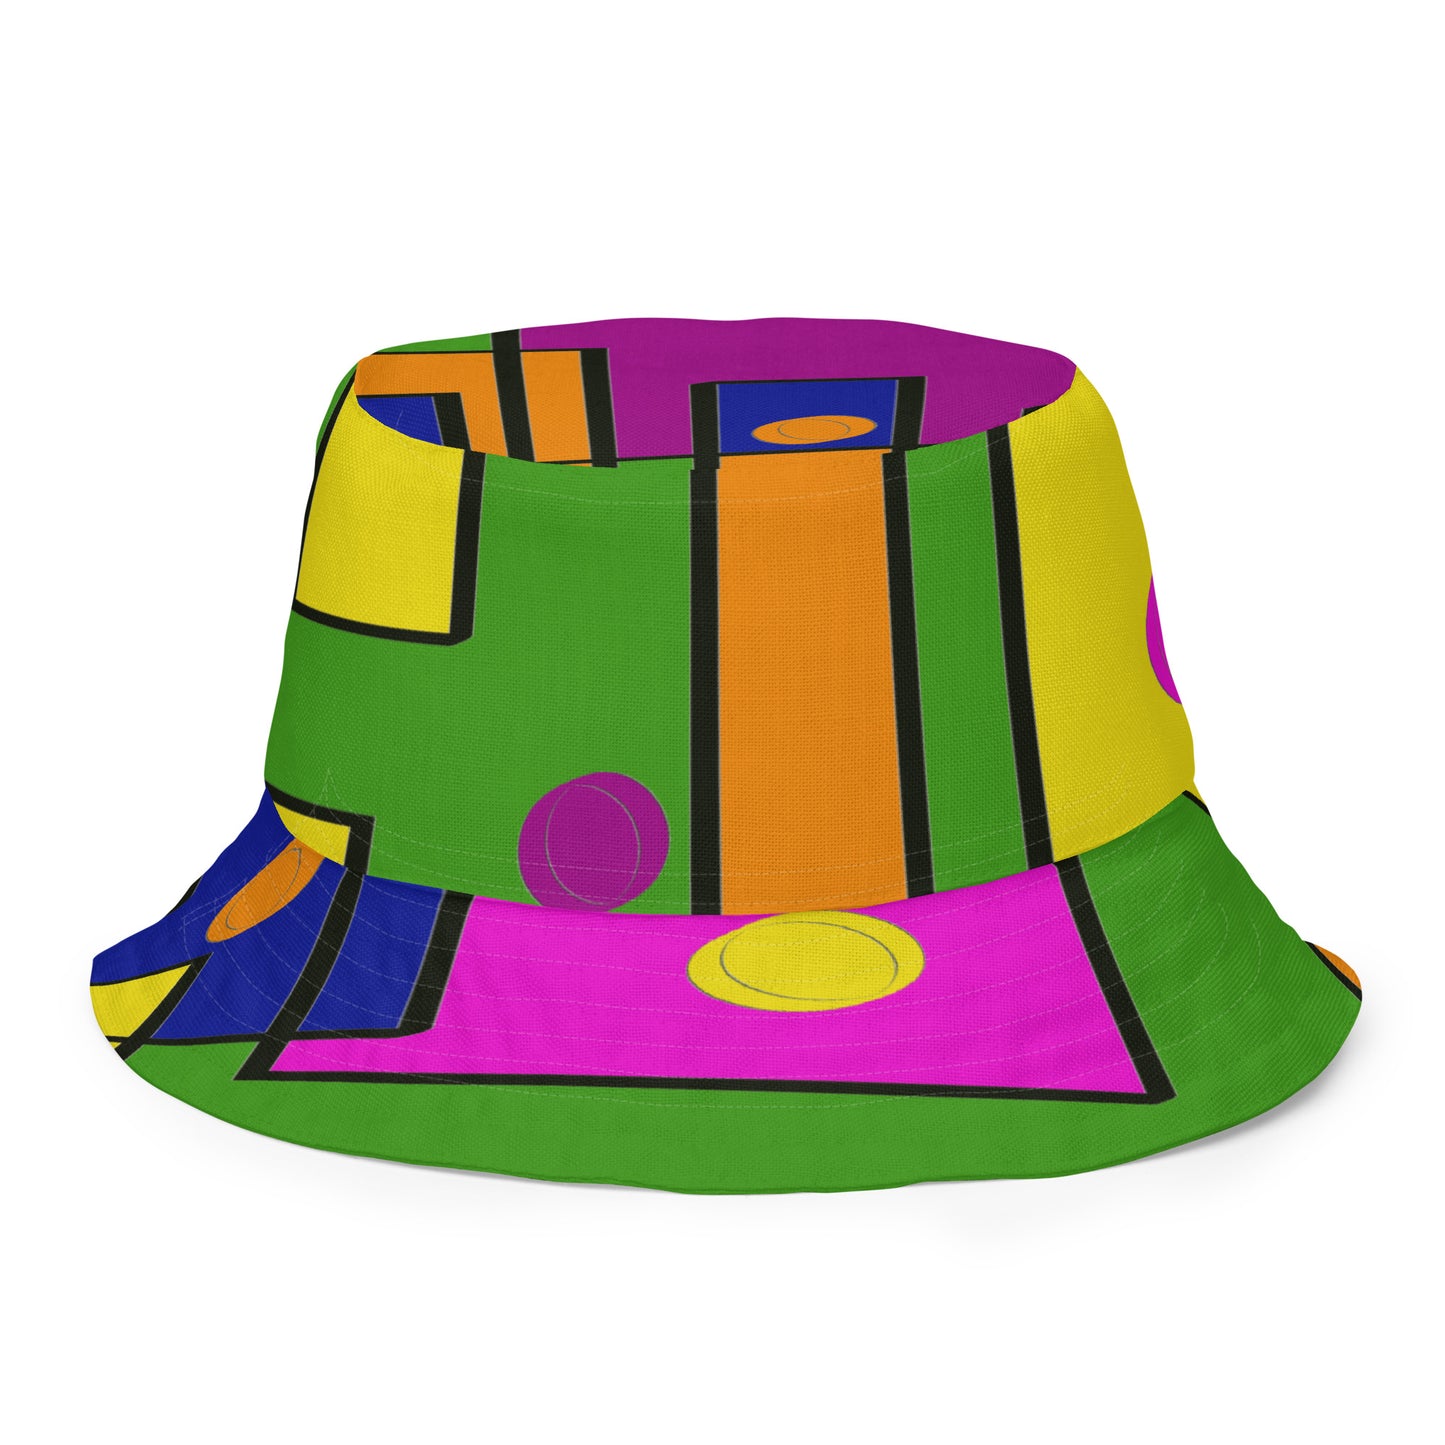 Abstract Reversible Bucket Hat - O By Onica Online Store